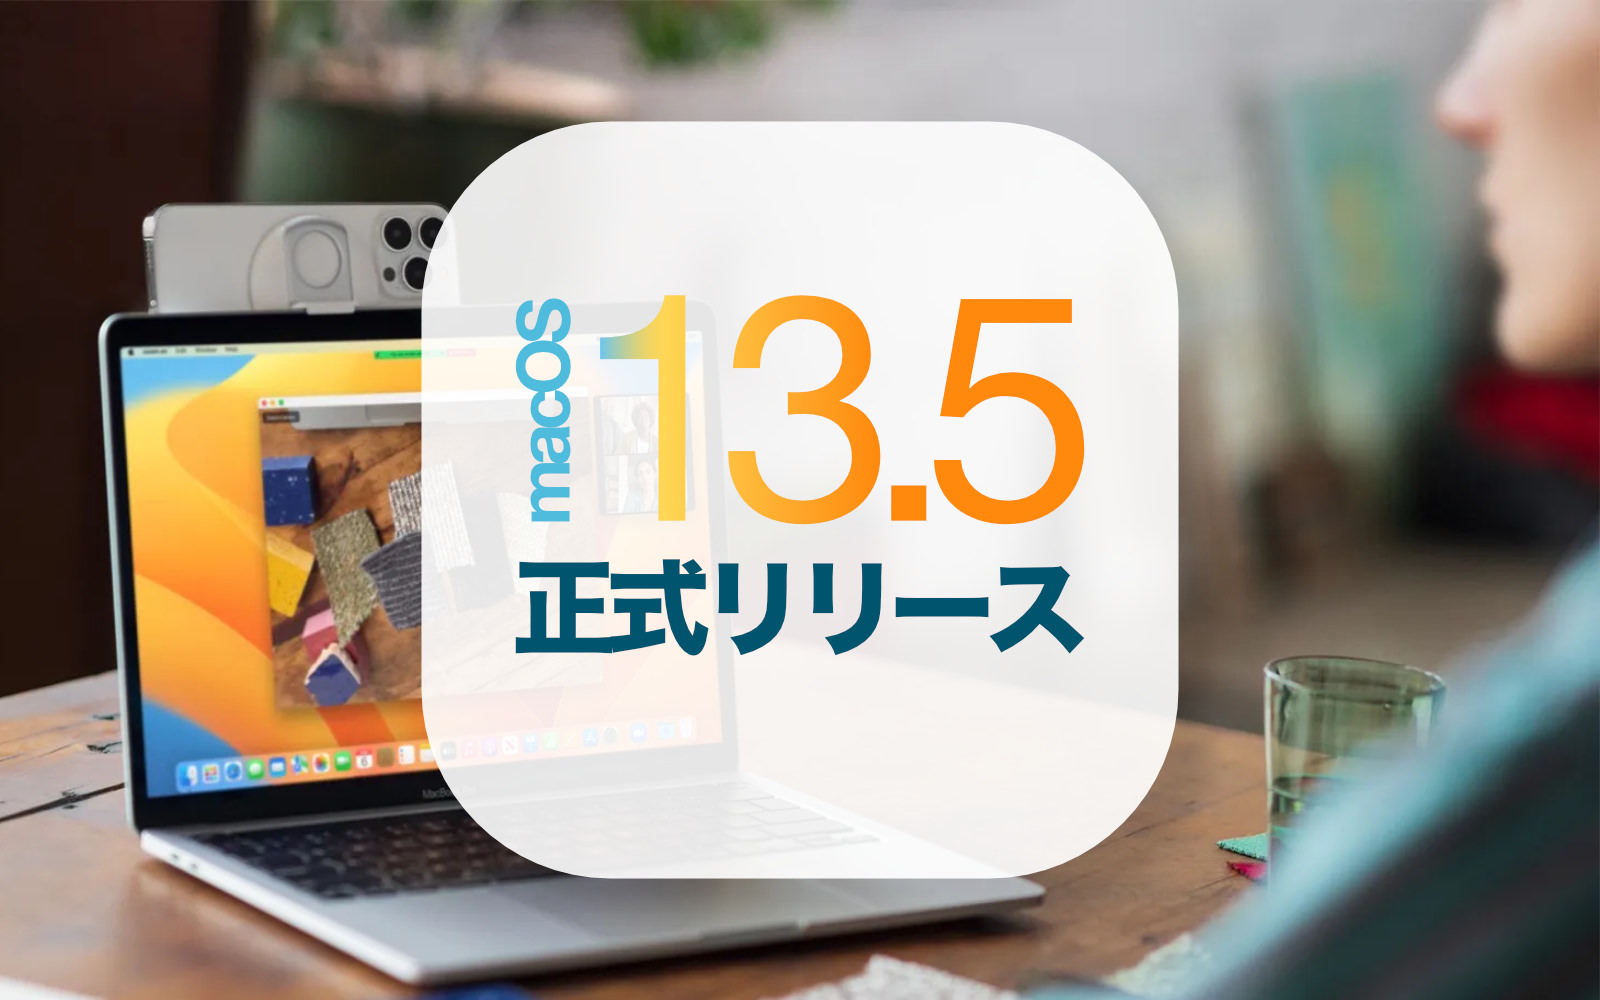 MacOS13 5 official release